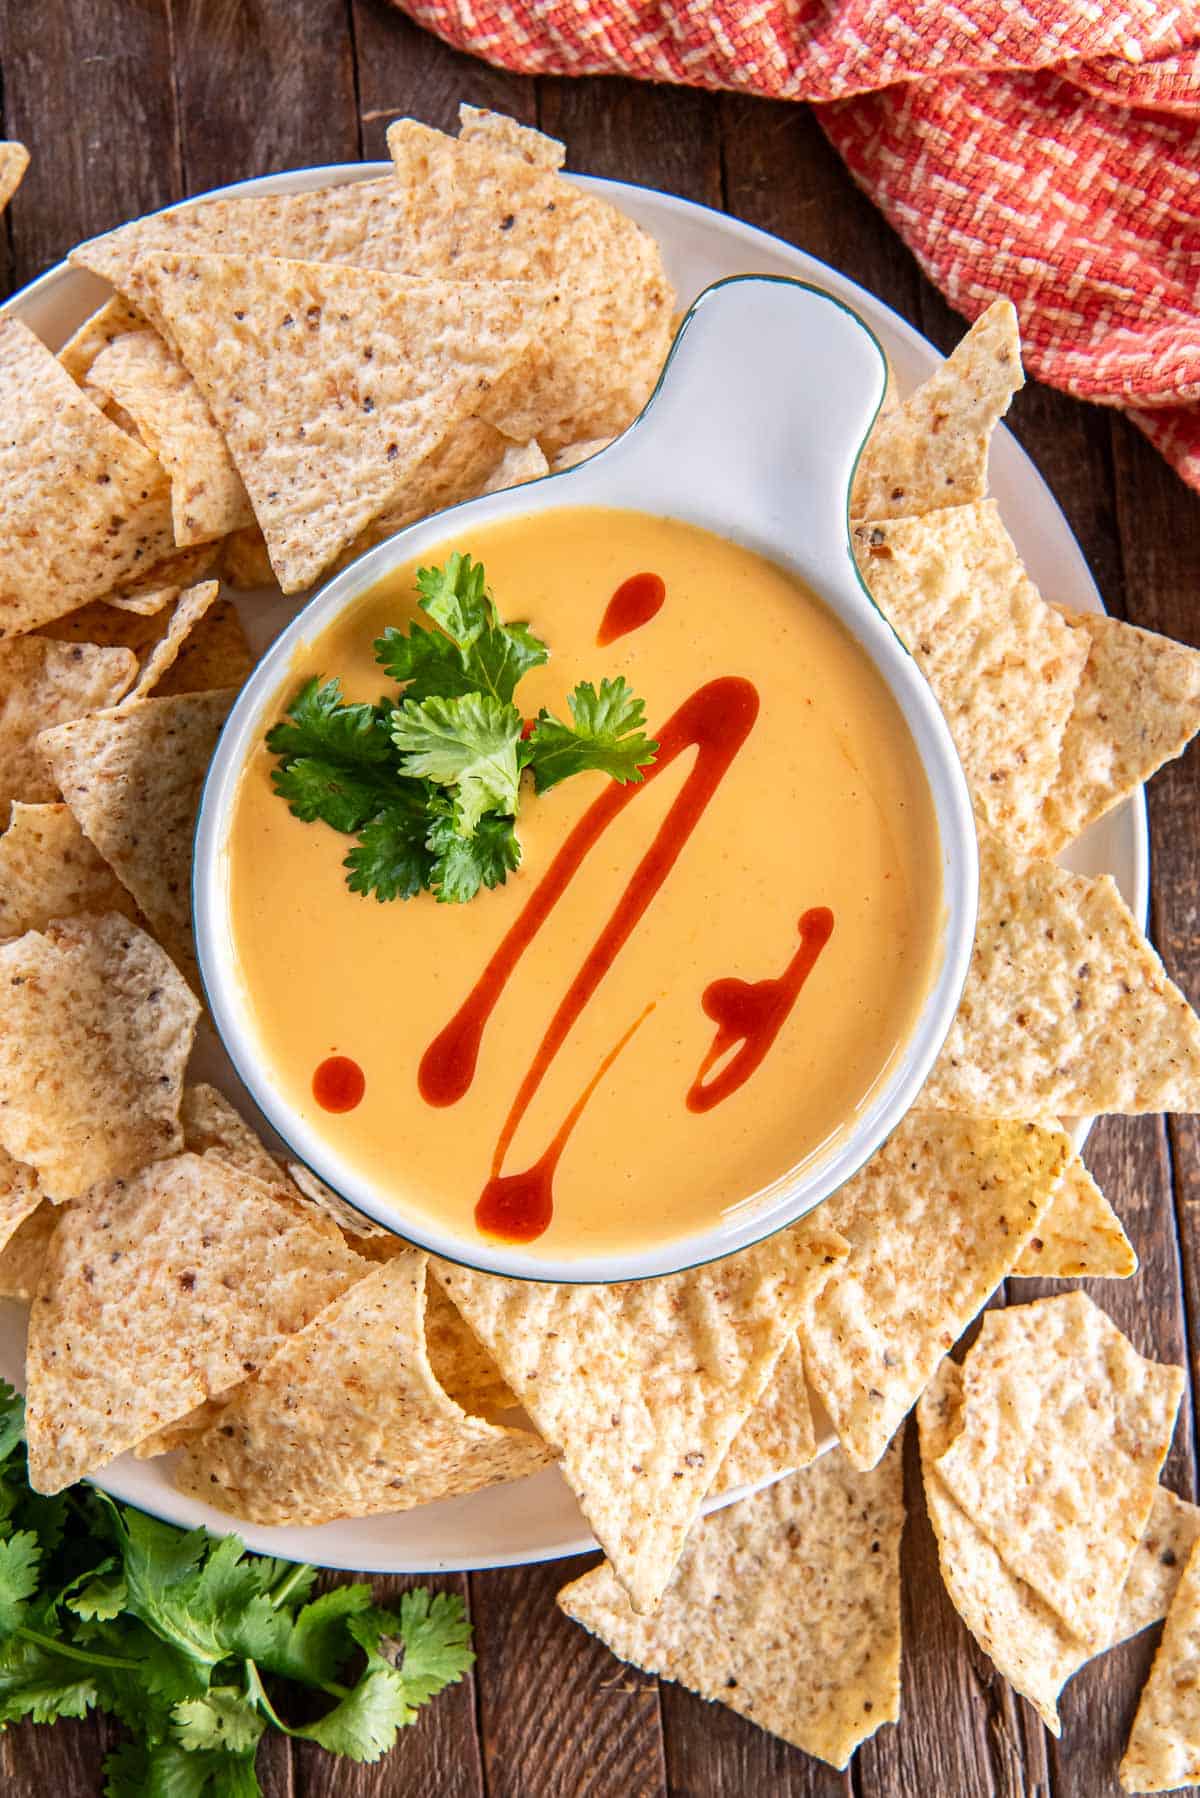 Nacho cheese sauce in a small white dish topped with hot sauce and cilantro and surrounded by tortilla chips.